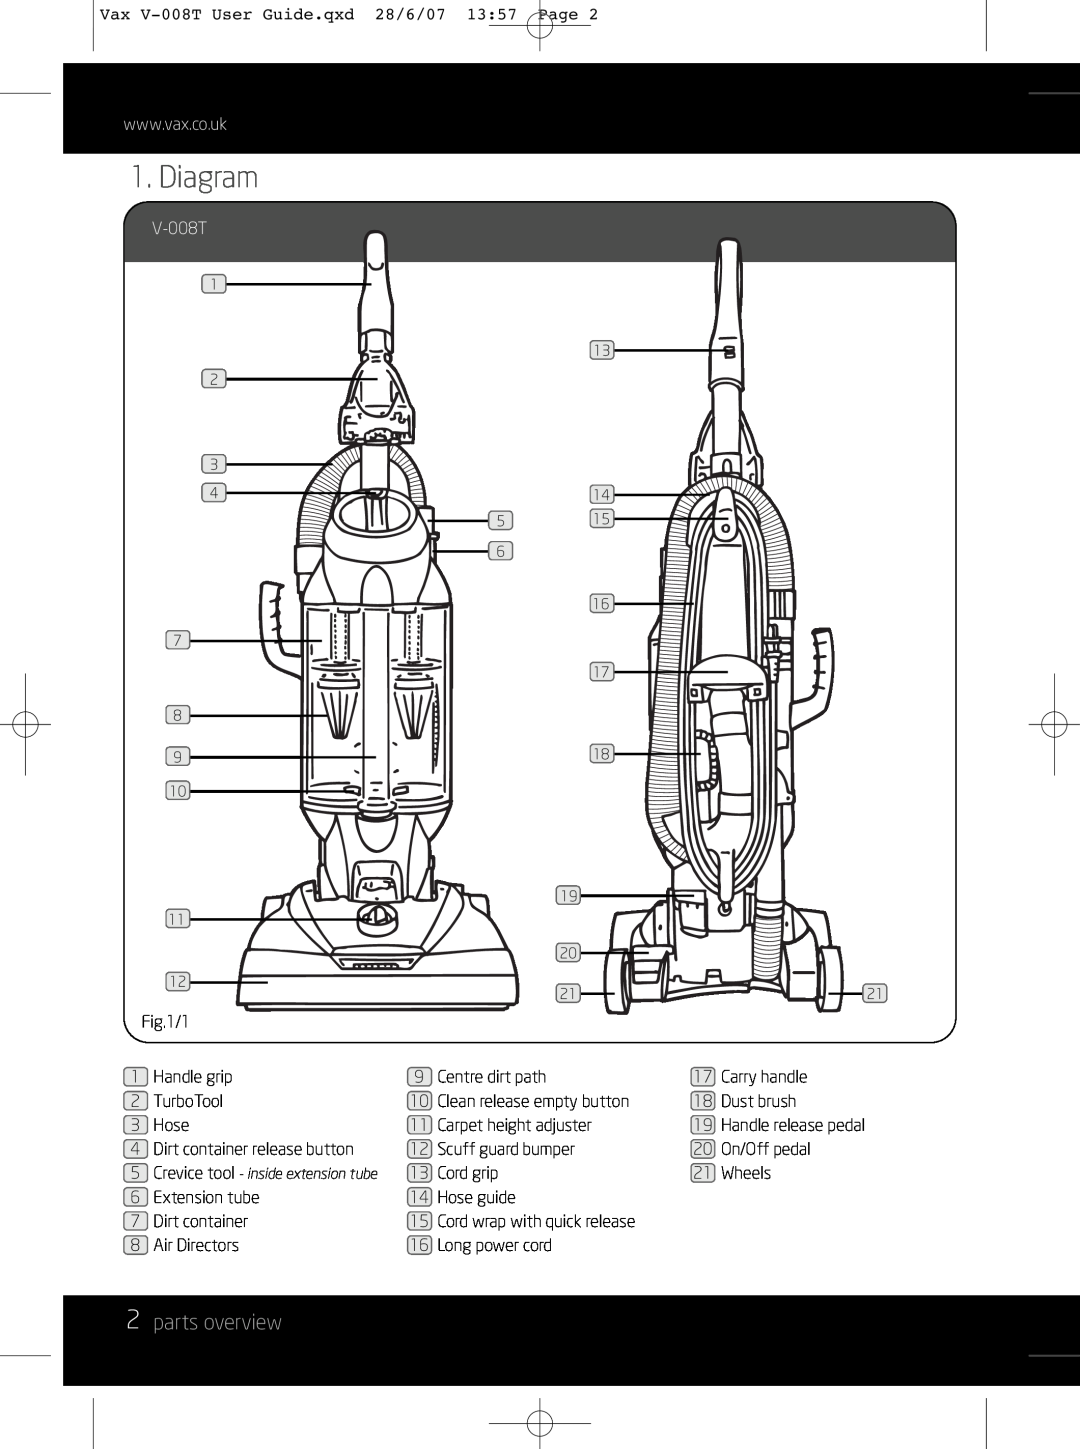 Vax V-008T instruction manual Diagram, 2parts overview 